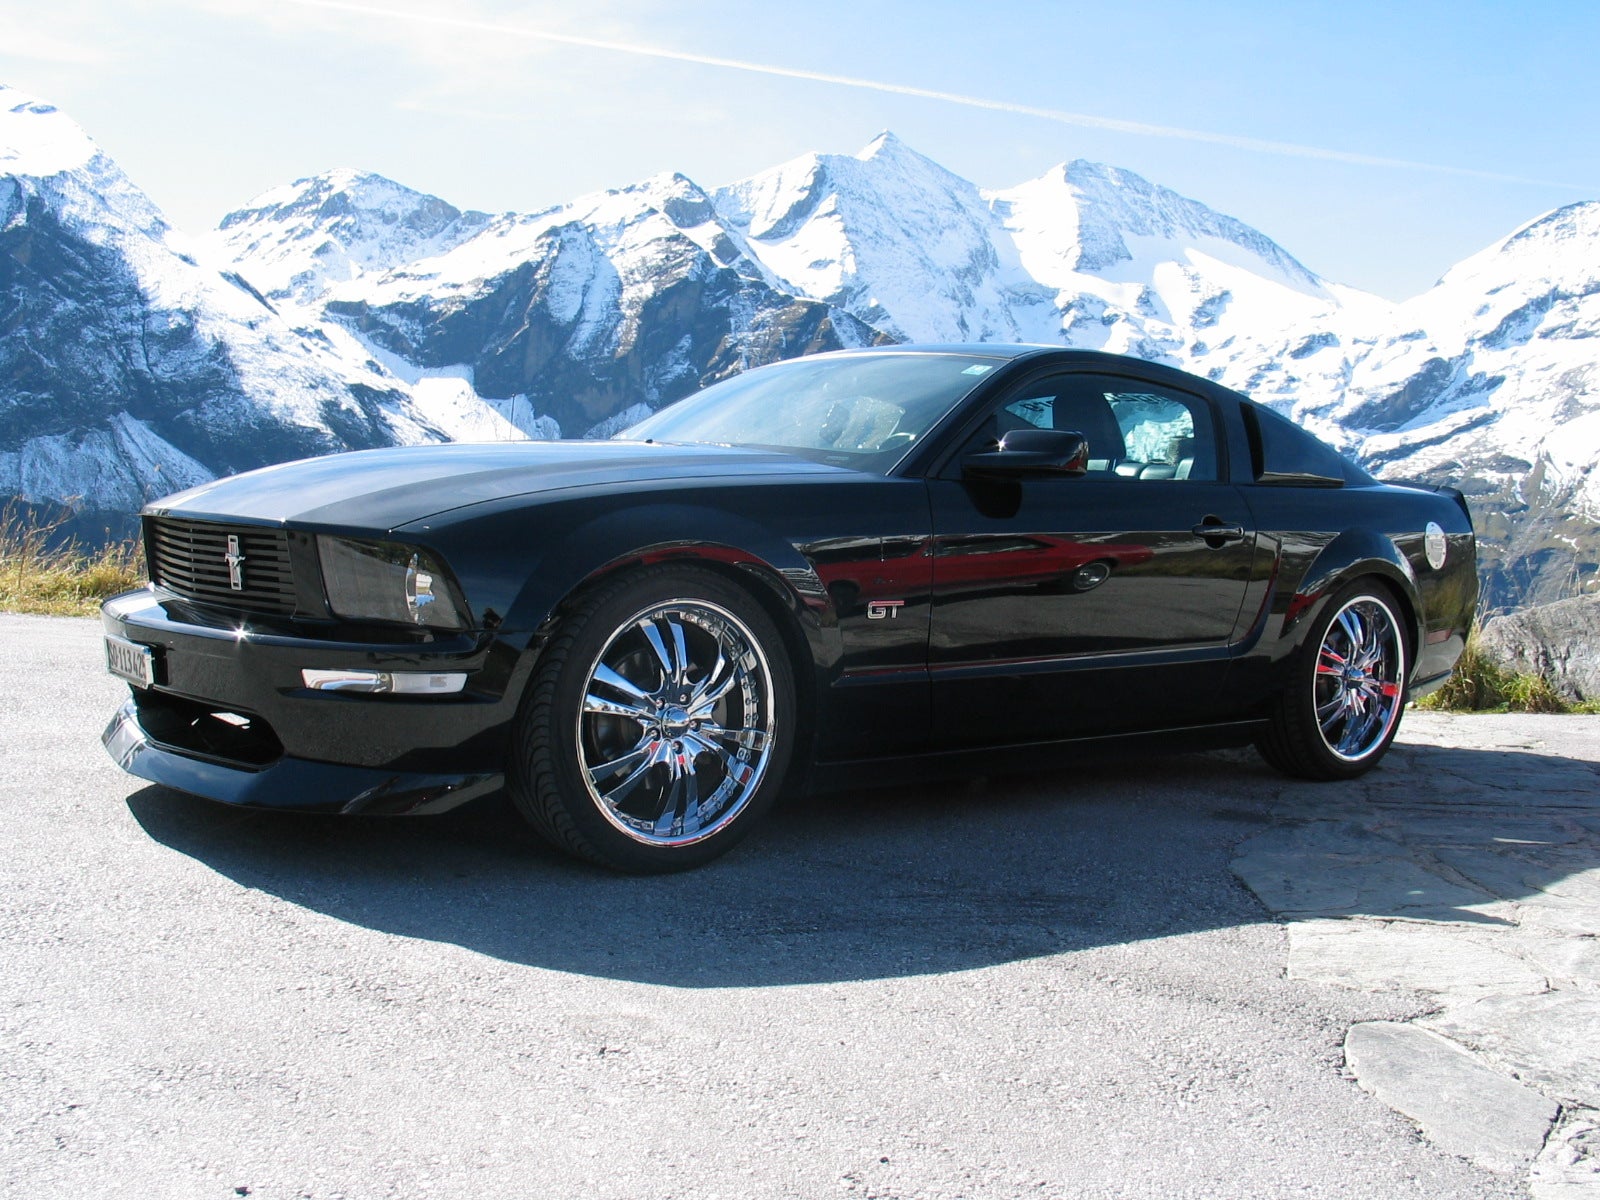 2005 Ford mustang gt msrp